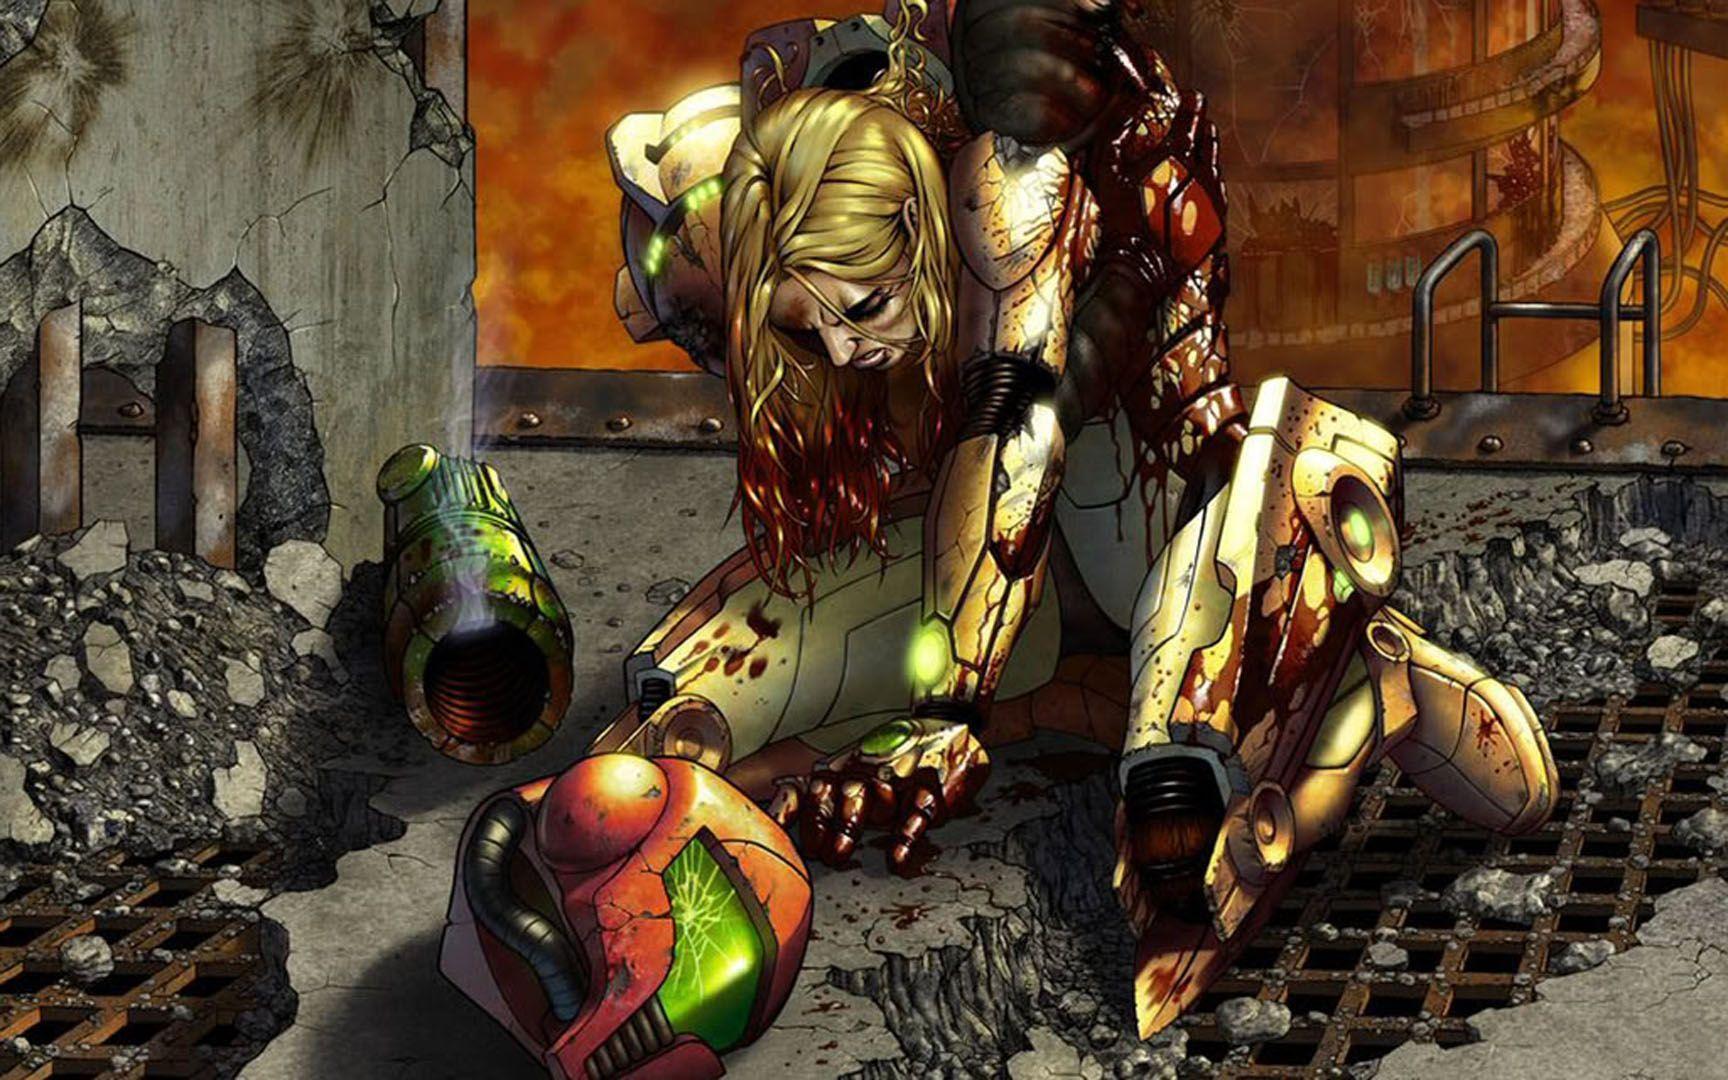 Wounded Samus Games Wallpaper Image featuring Metroid